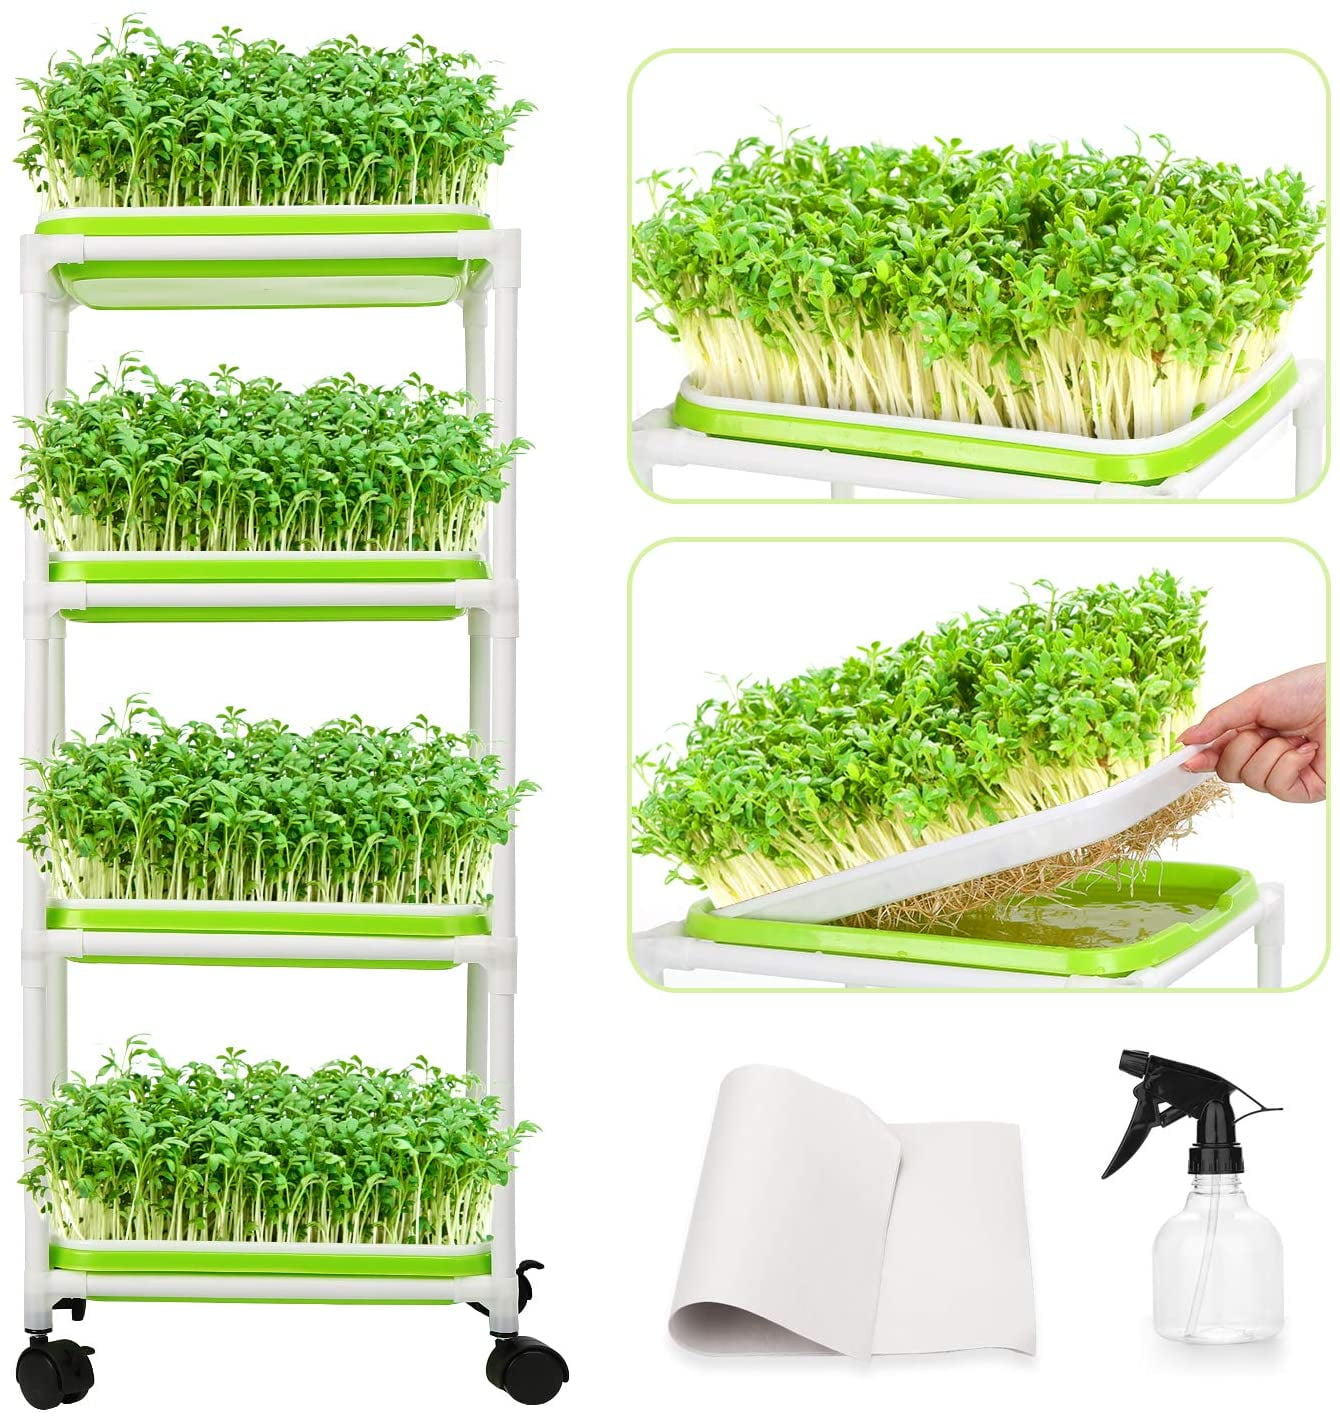 DOITOOL 10pcs Seedling Starter Trays with 128 Cells Plastic Wheatgrass Sprouting Trays Seed Sprouter Trays Nursery Pots for Seedling Germination 110g Black